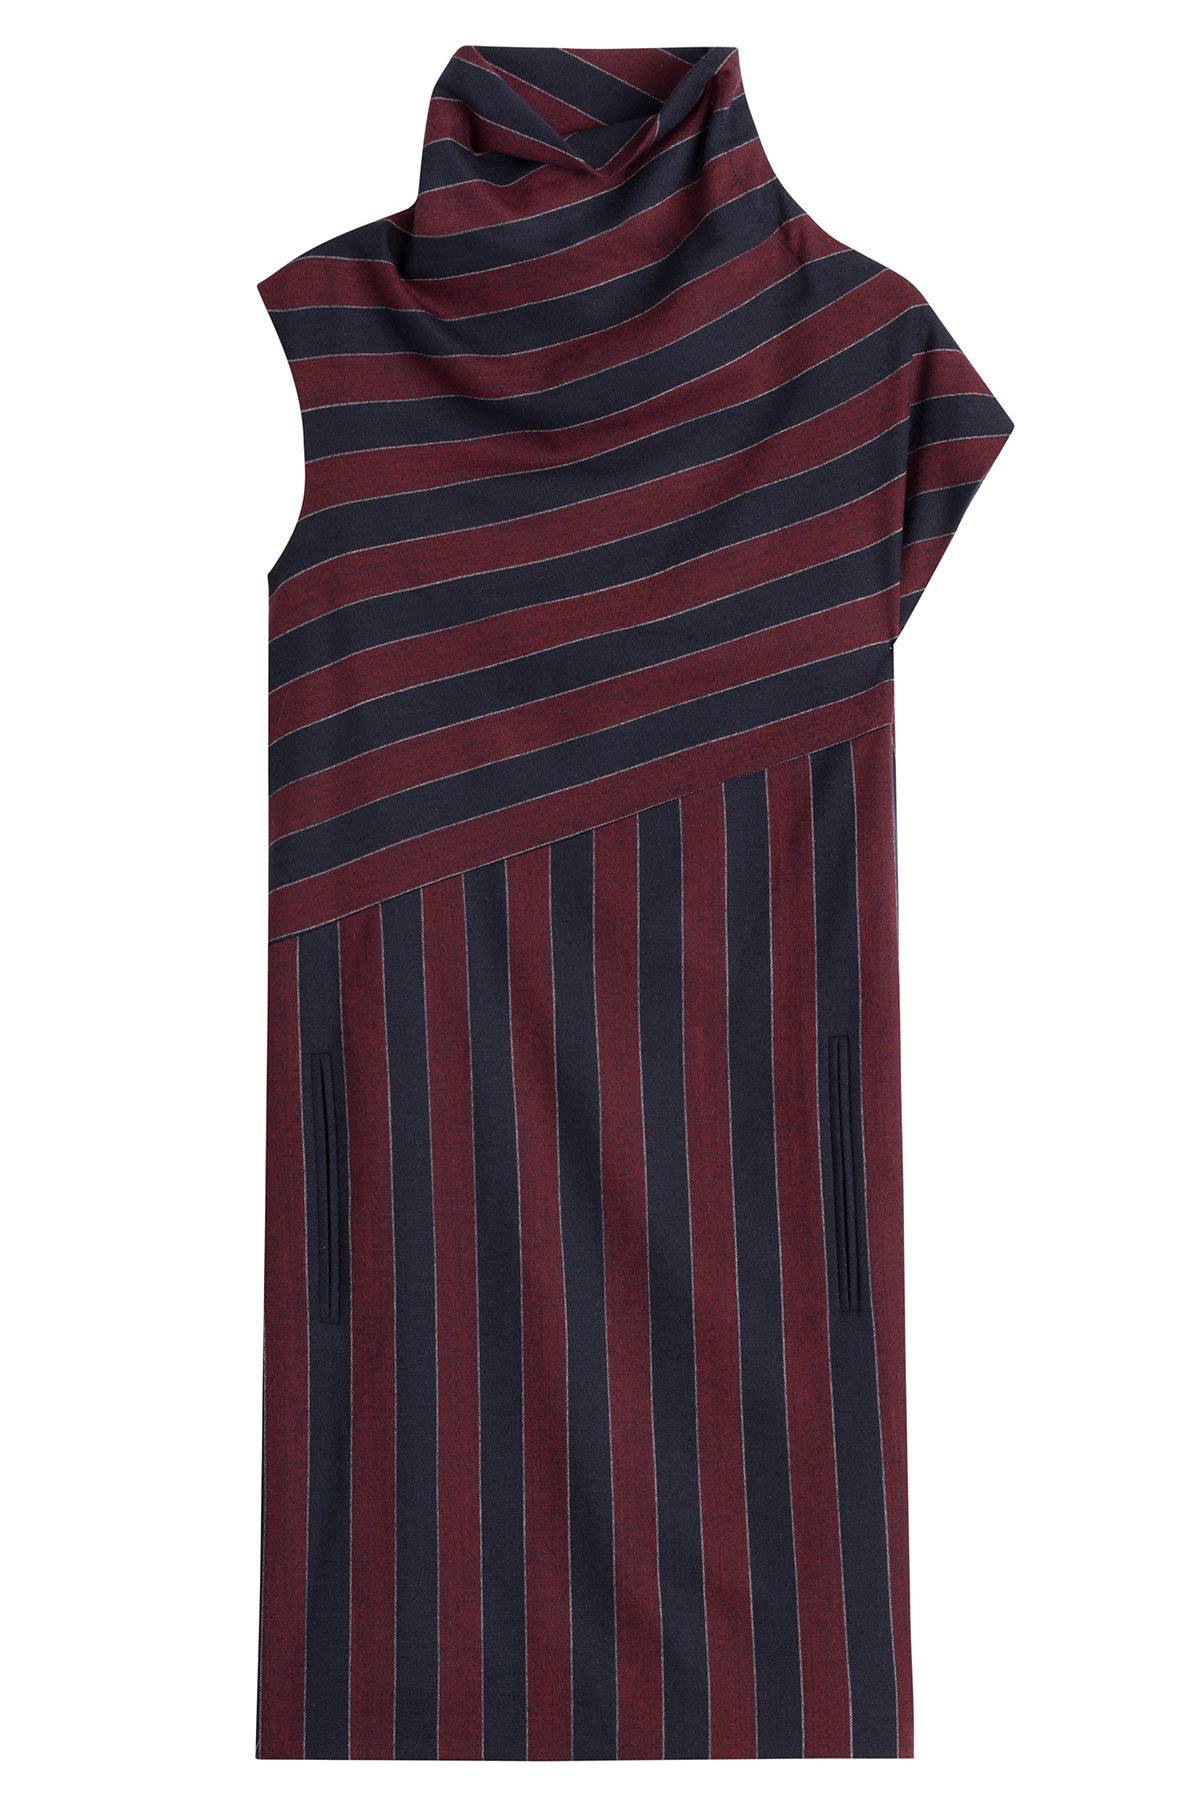 Carven - Striped Dress with Wool